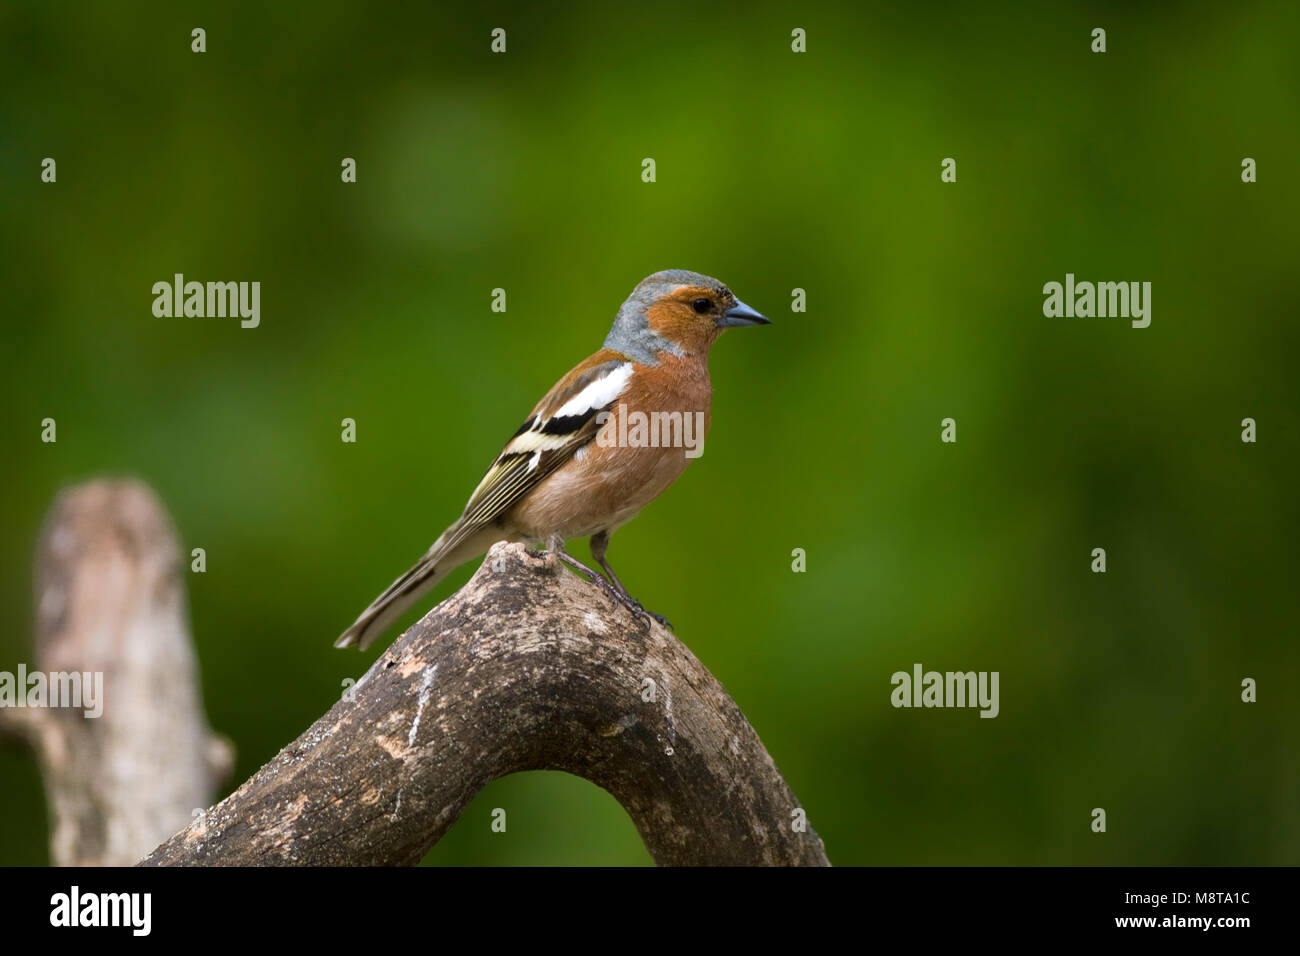 Mannetje Vink; Male Common Chaffinch Stock Photo